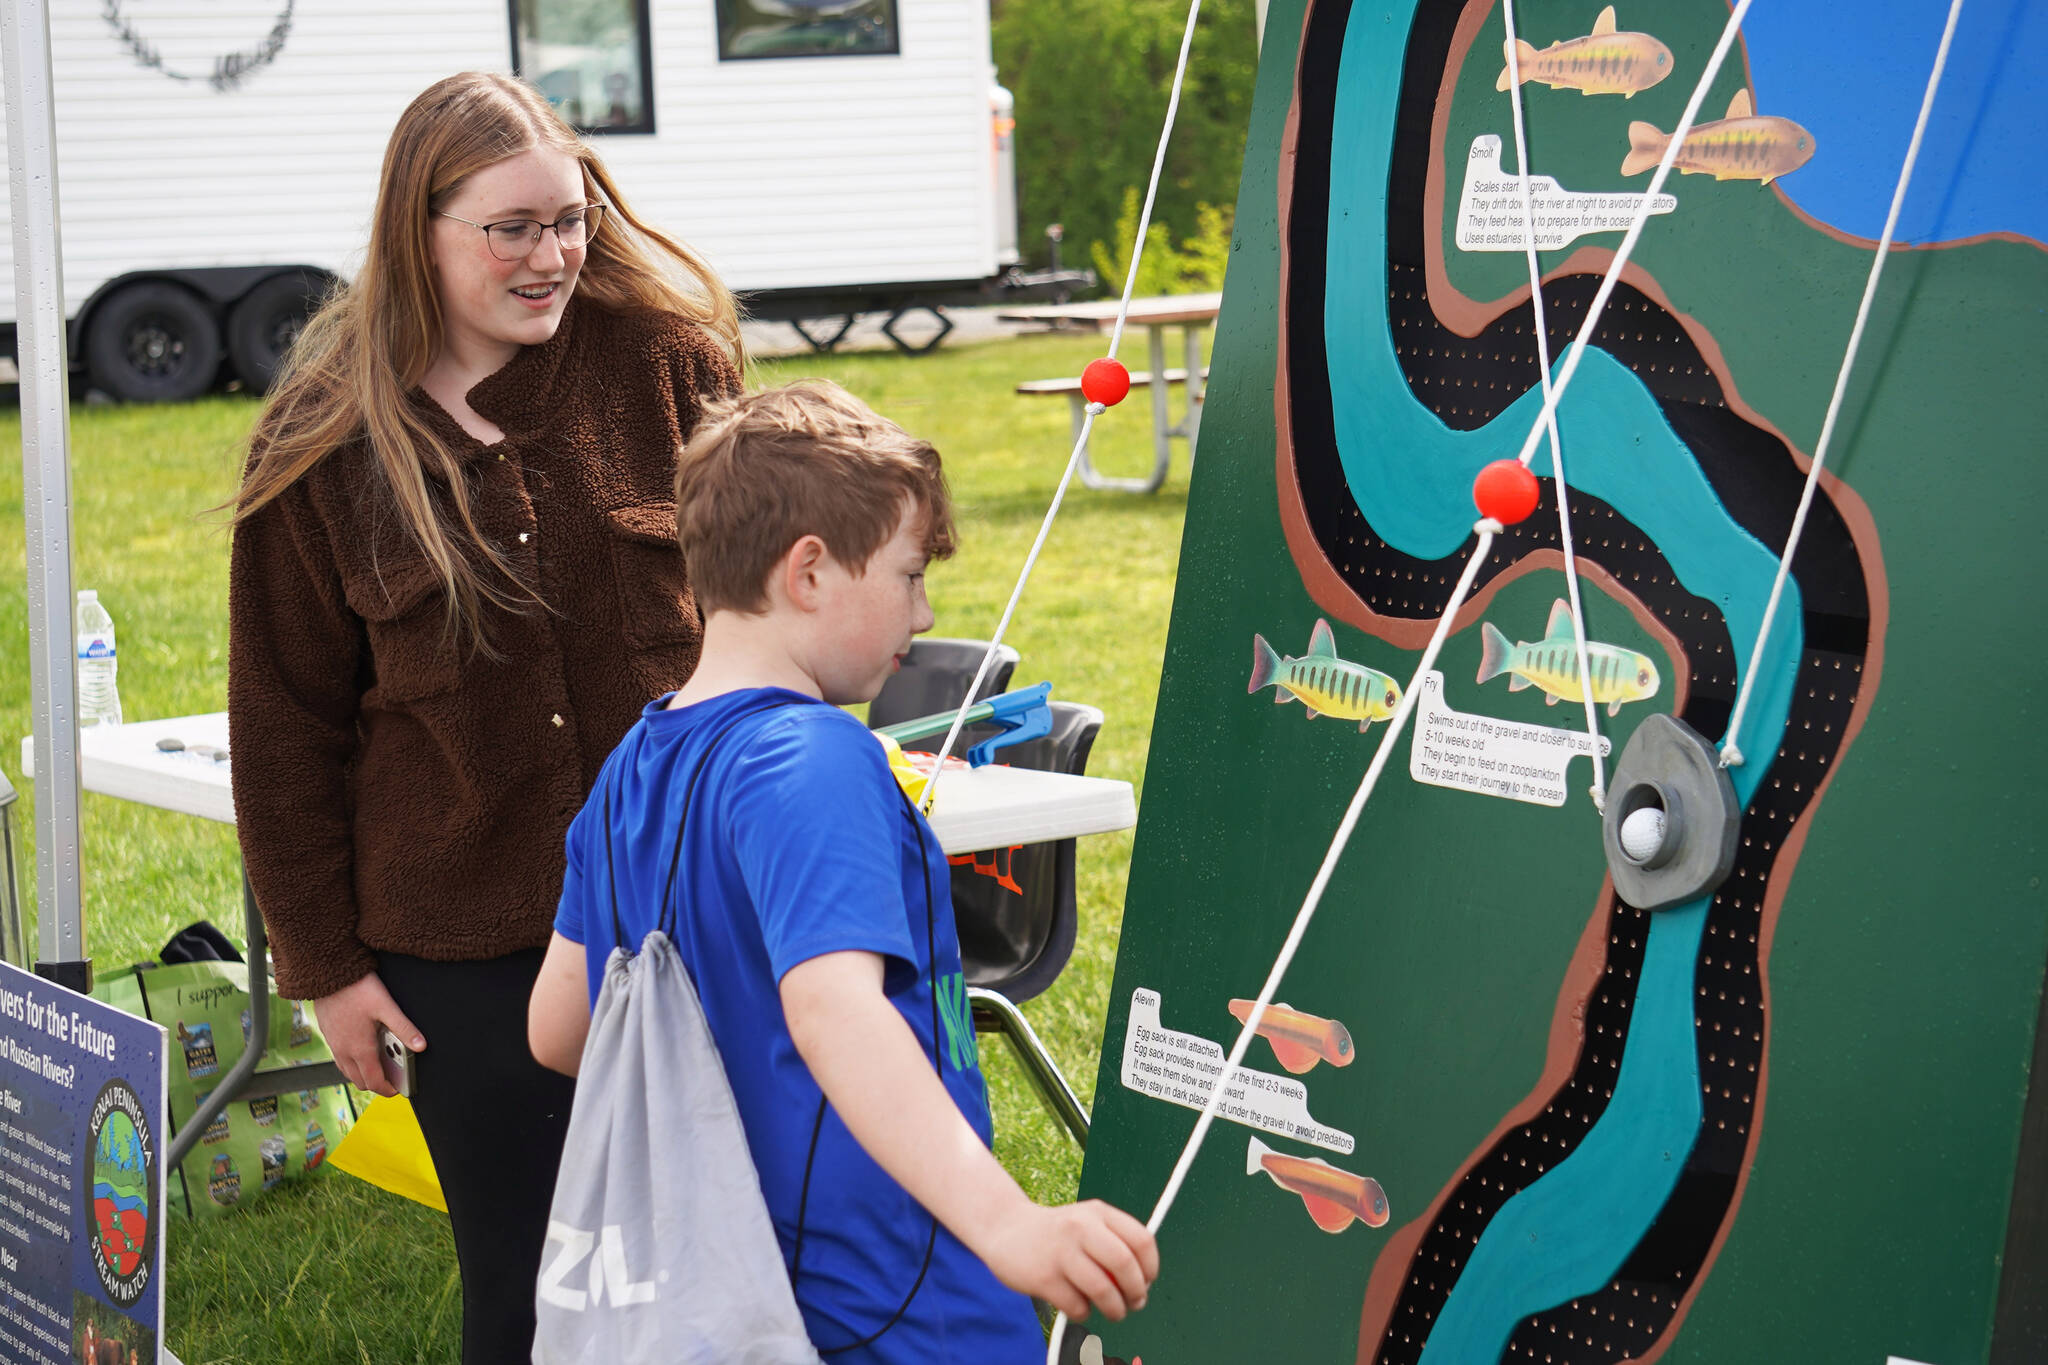 Emerson Kapp, second-place winner of the 2023 Caring for the Kenai competition, directs participants in the use of her project, the Kenai Peninsula Maze Board during the Kenai River Festival on Friday, June 9, 2023, at Soldotna Creek Park in Soldotna, Alaska. (Jake Dye/Peninsula Clarion)